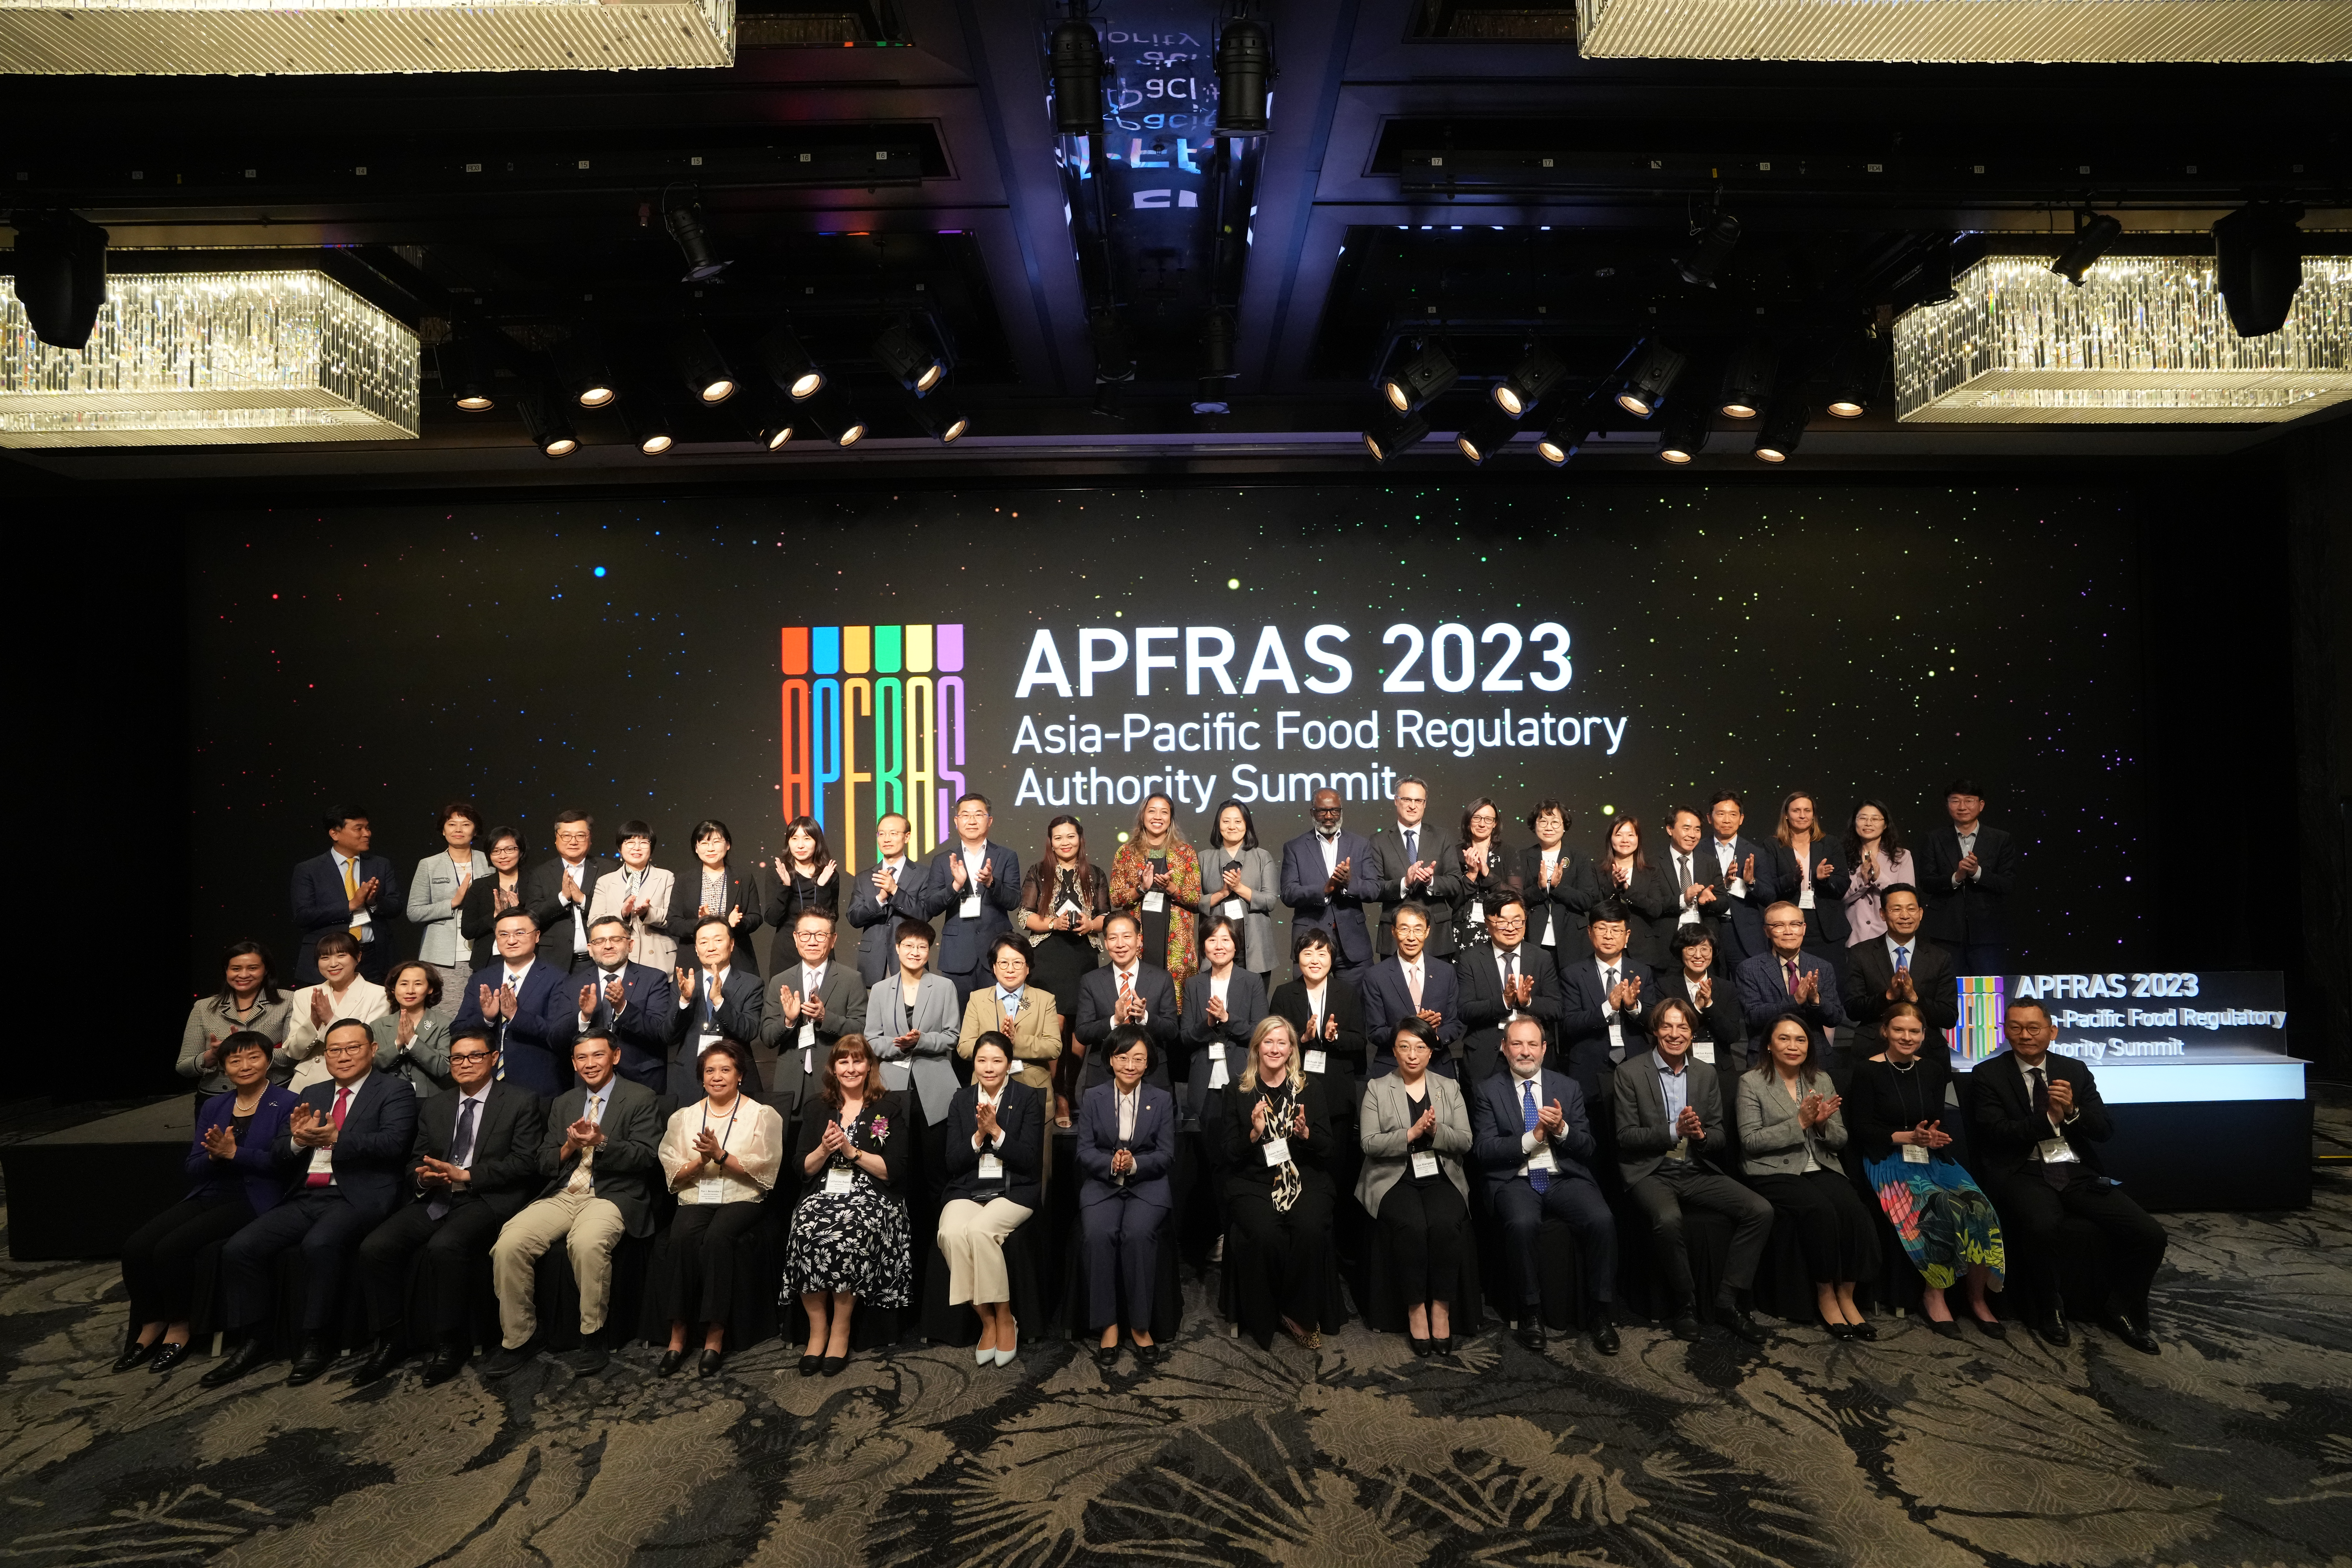 Photo News5 - [May 10, 2023] Minister Delivers Opening Speech at APFRAS 2023